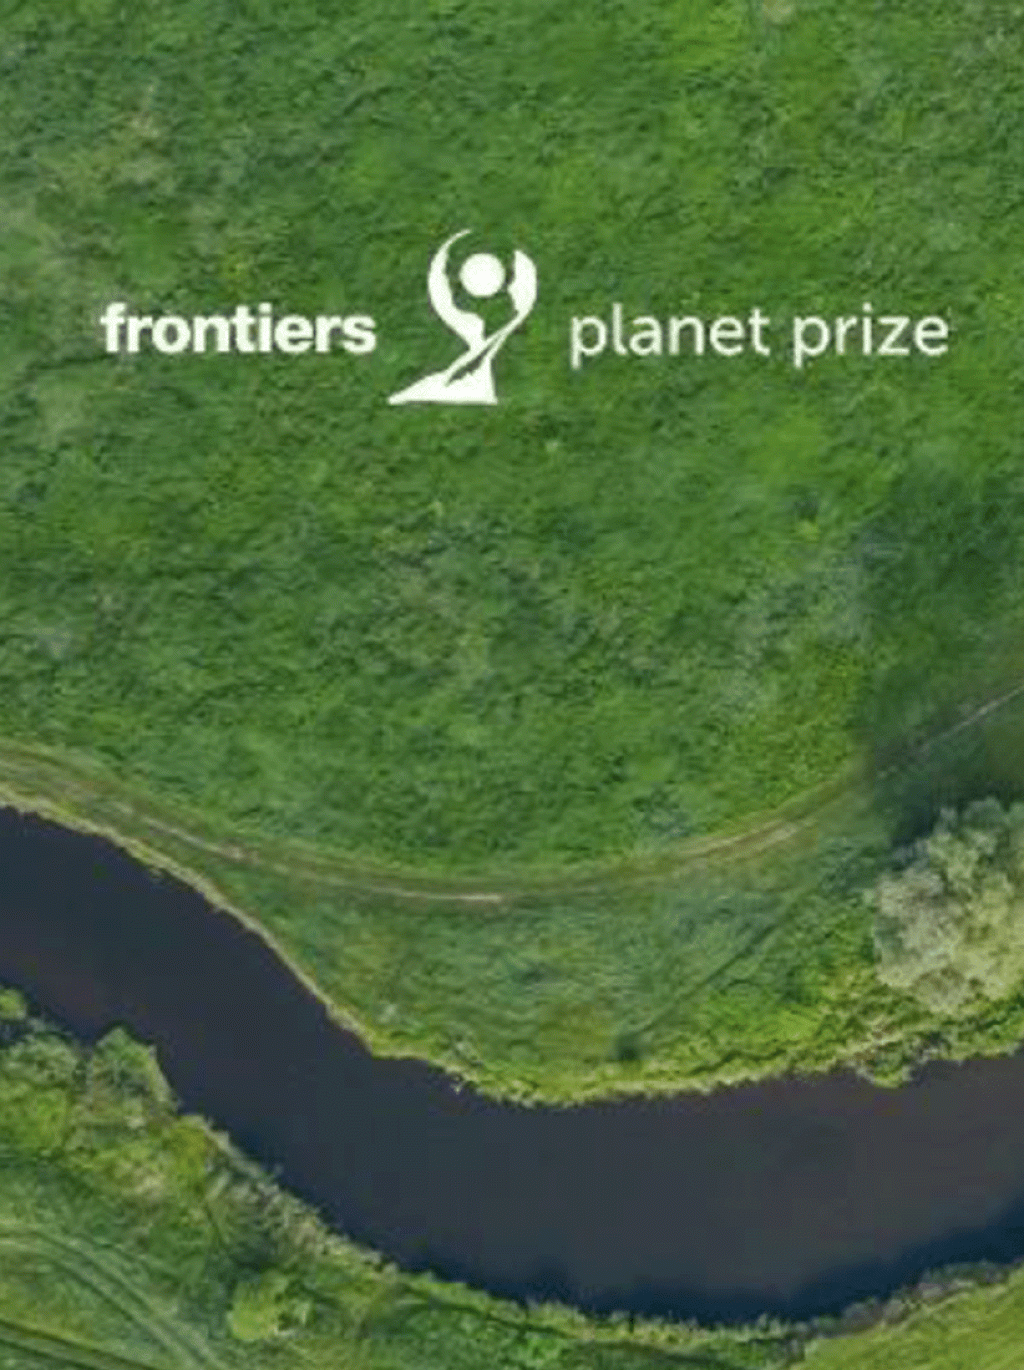 FrontiersPlanetPrize